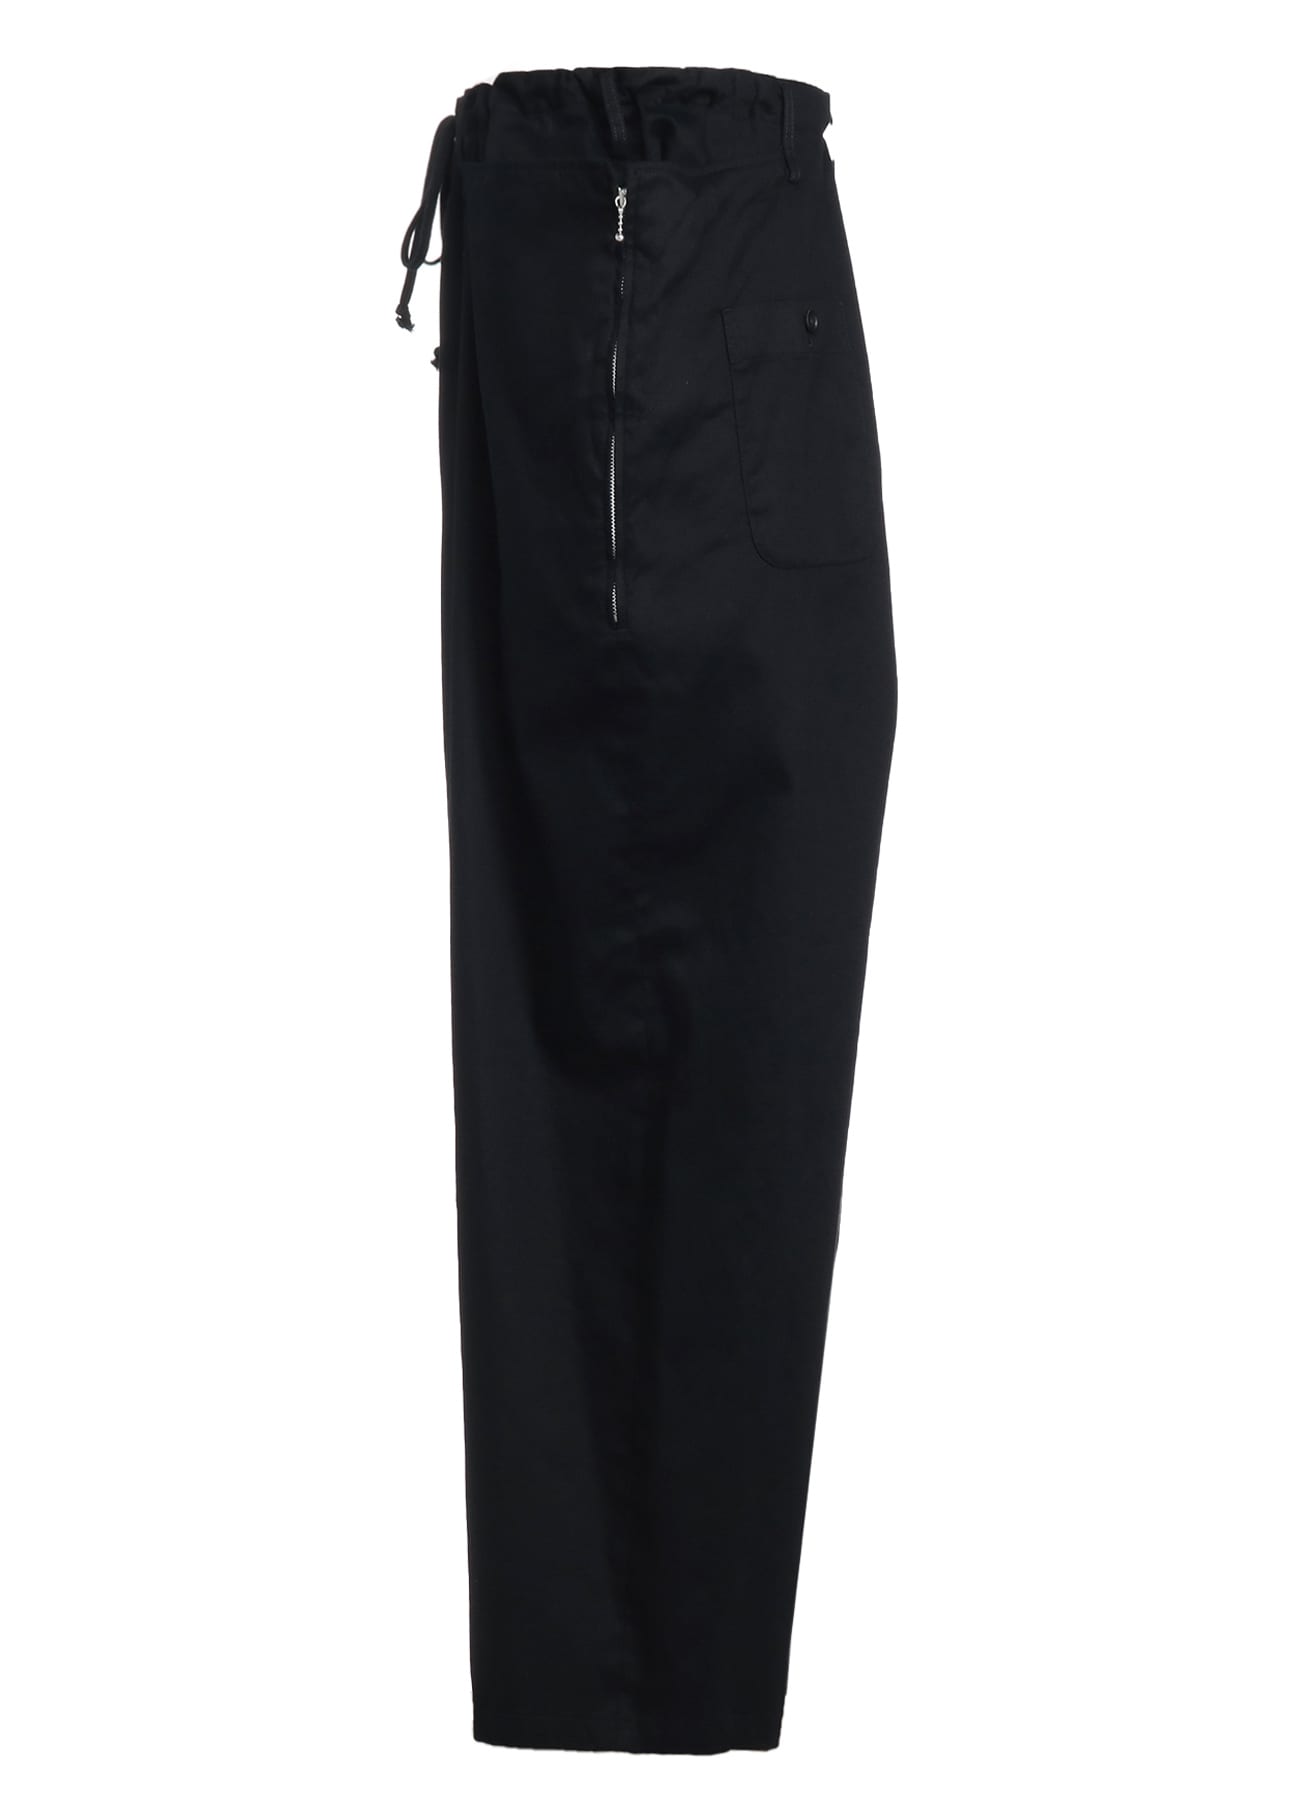 COTTON TWILL DRAWSTRING WIDE PANTS WITH ZIP SIDE POCKET